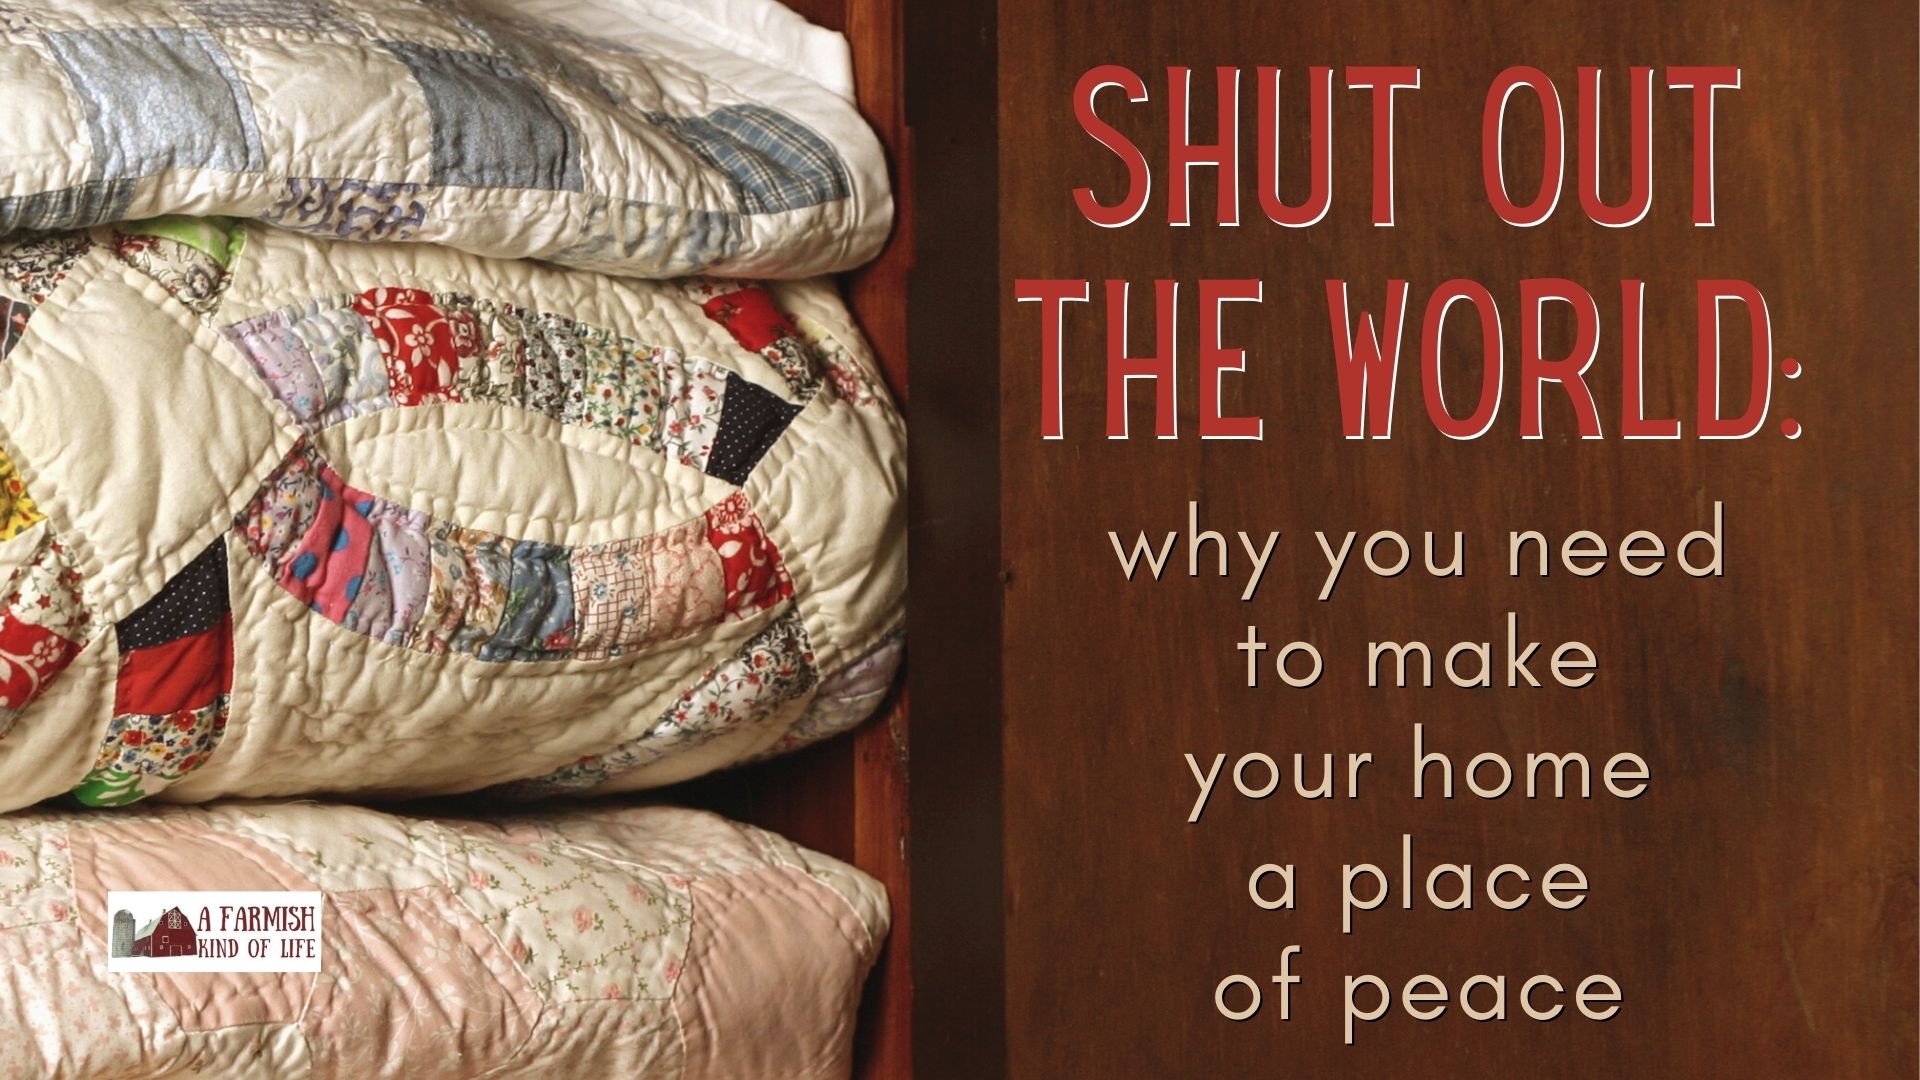 184: Shut out the world and make a peaceful home